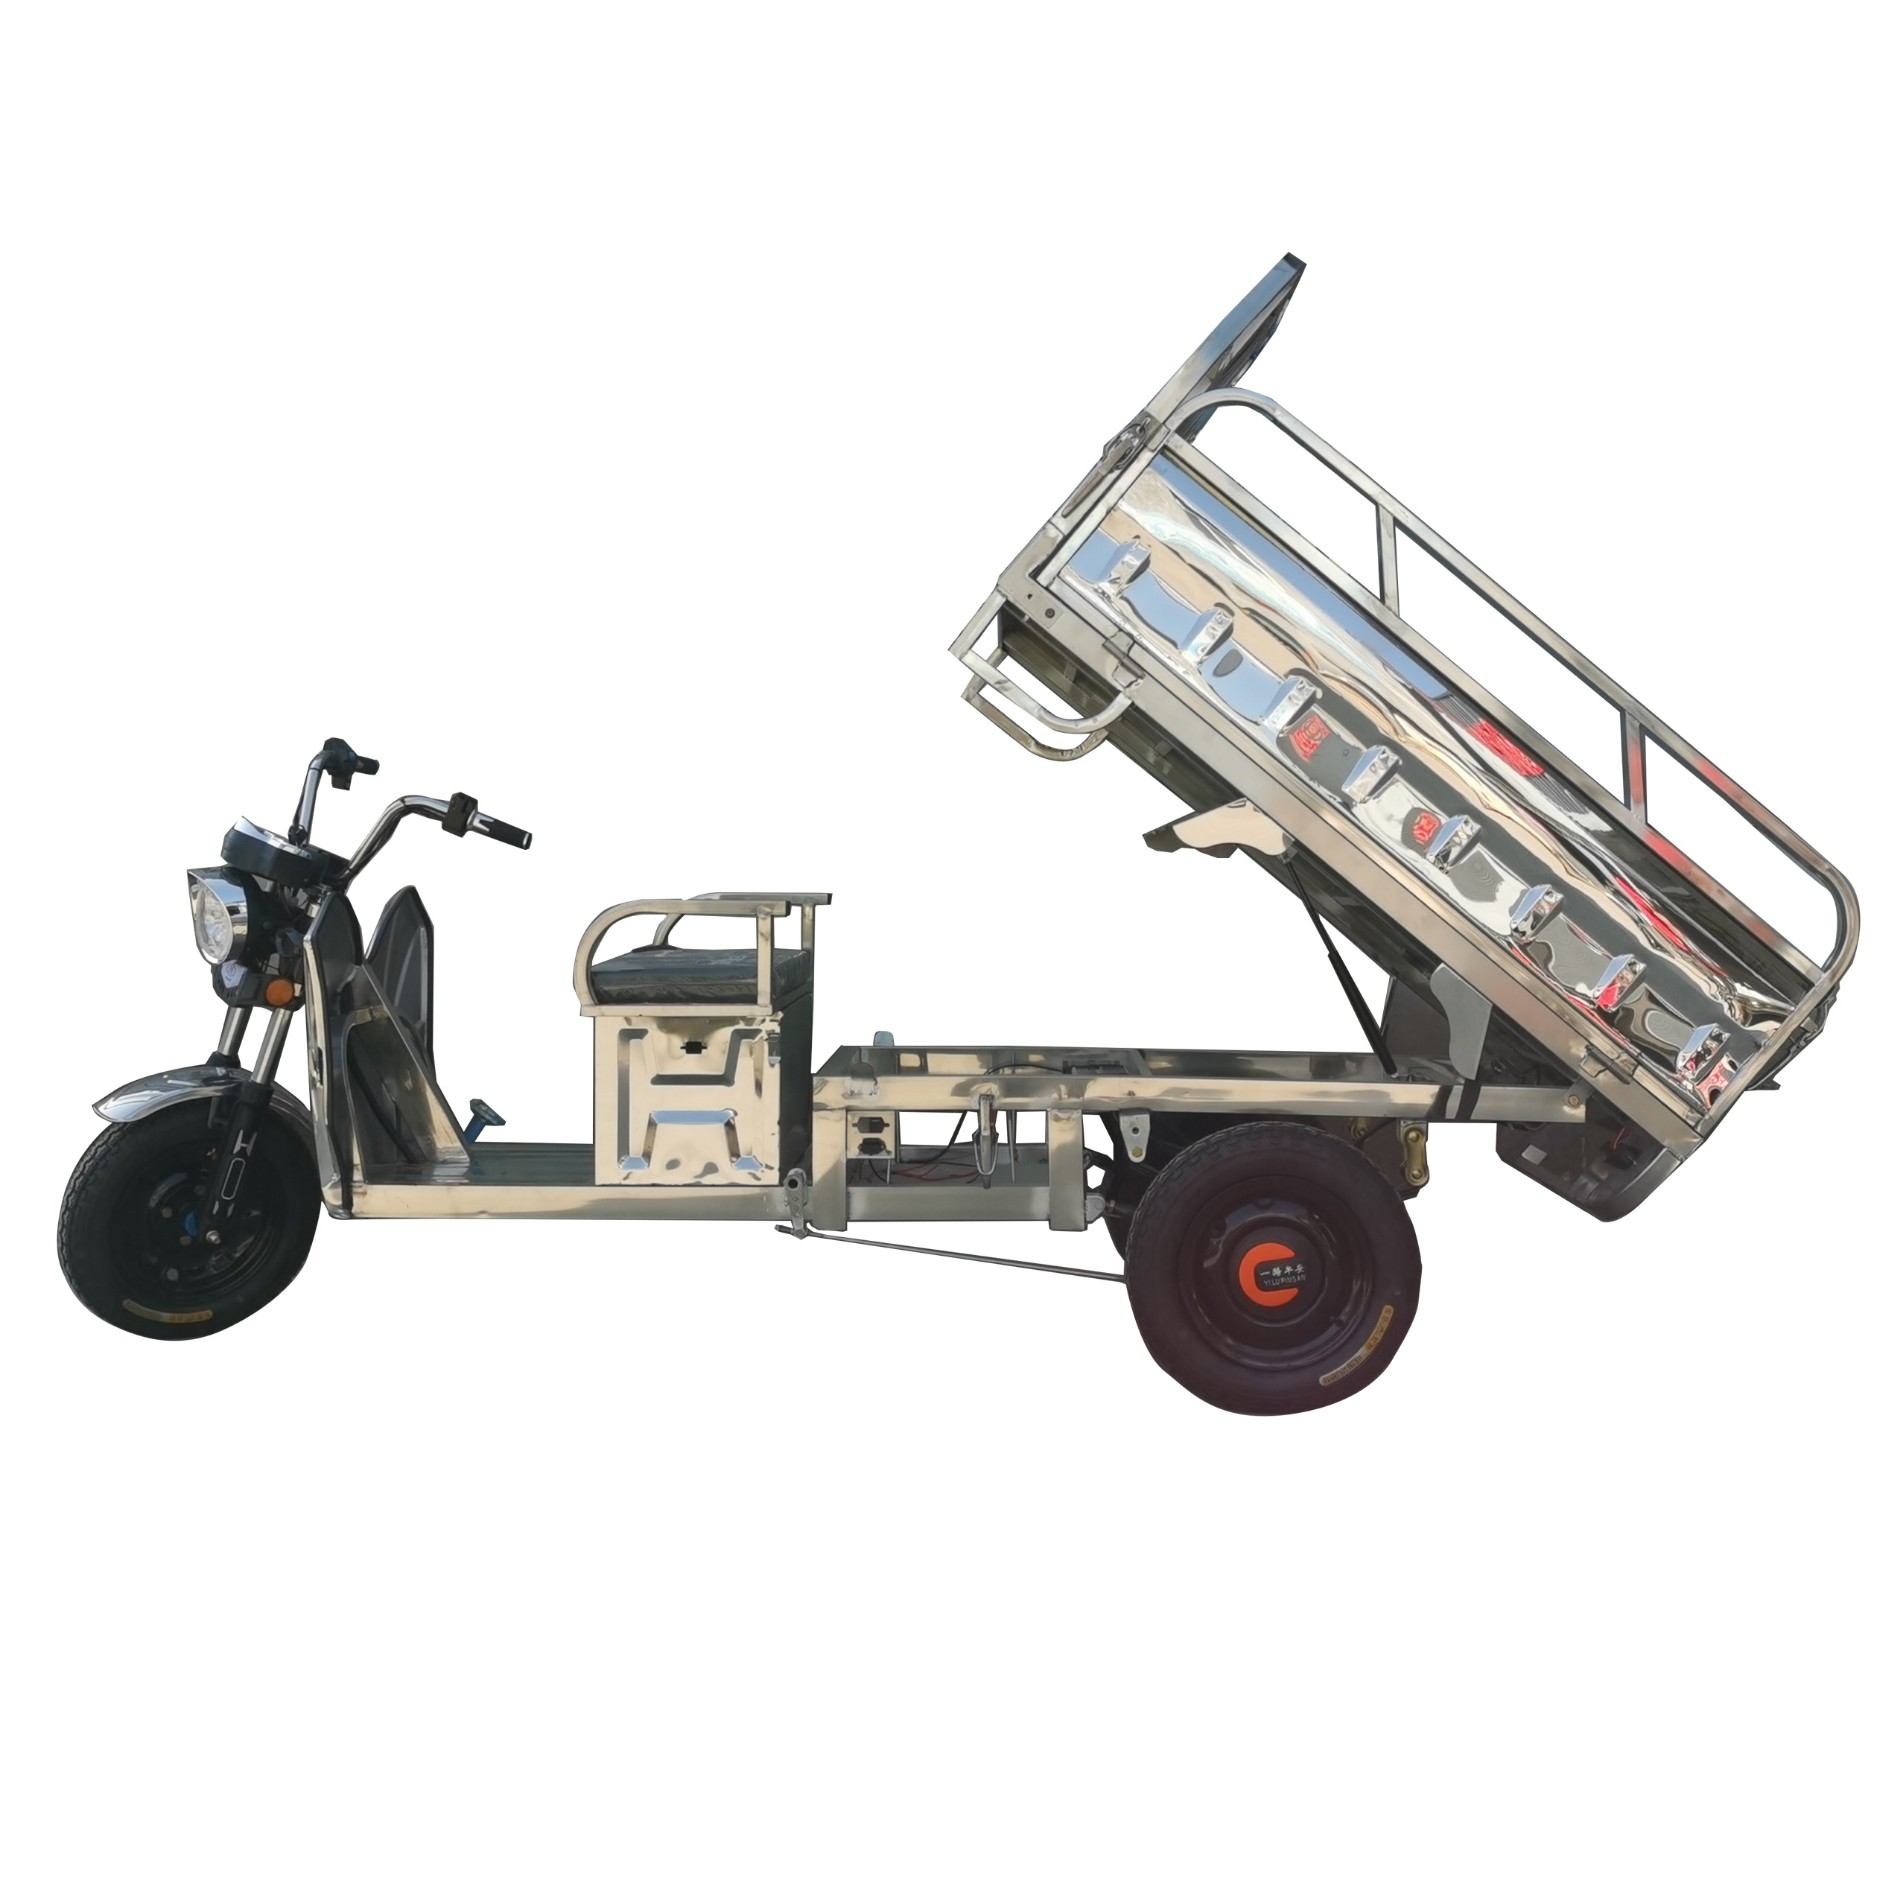 Auto dumper electric cargo trike stainless